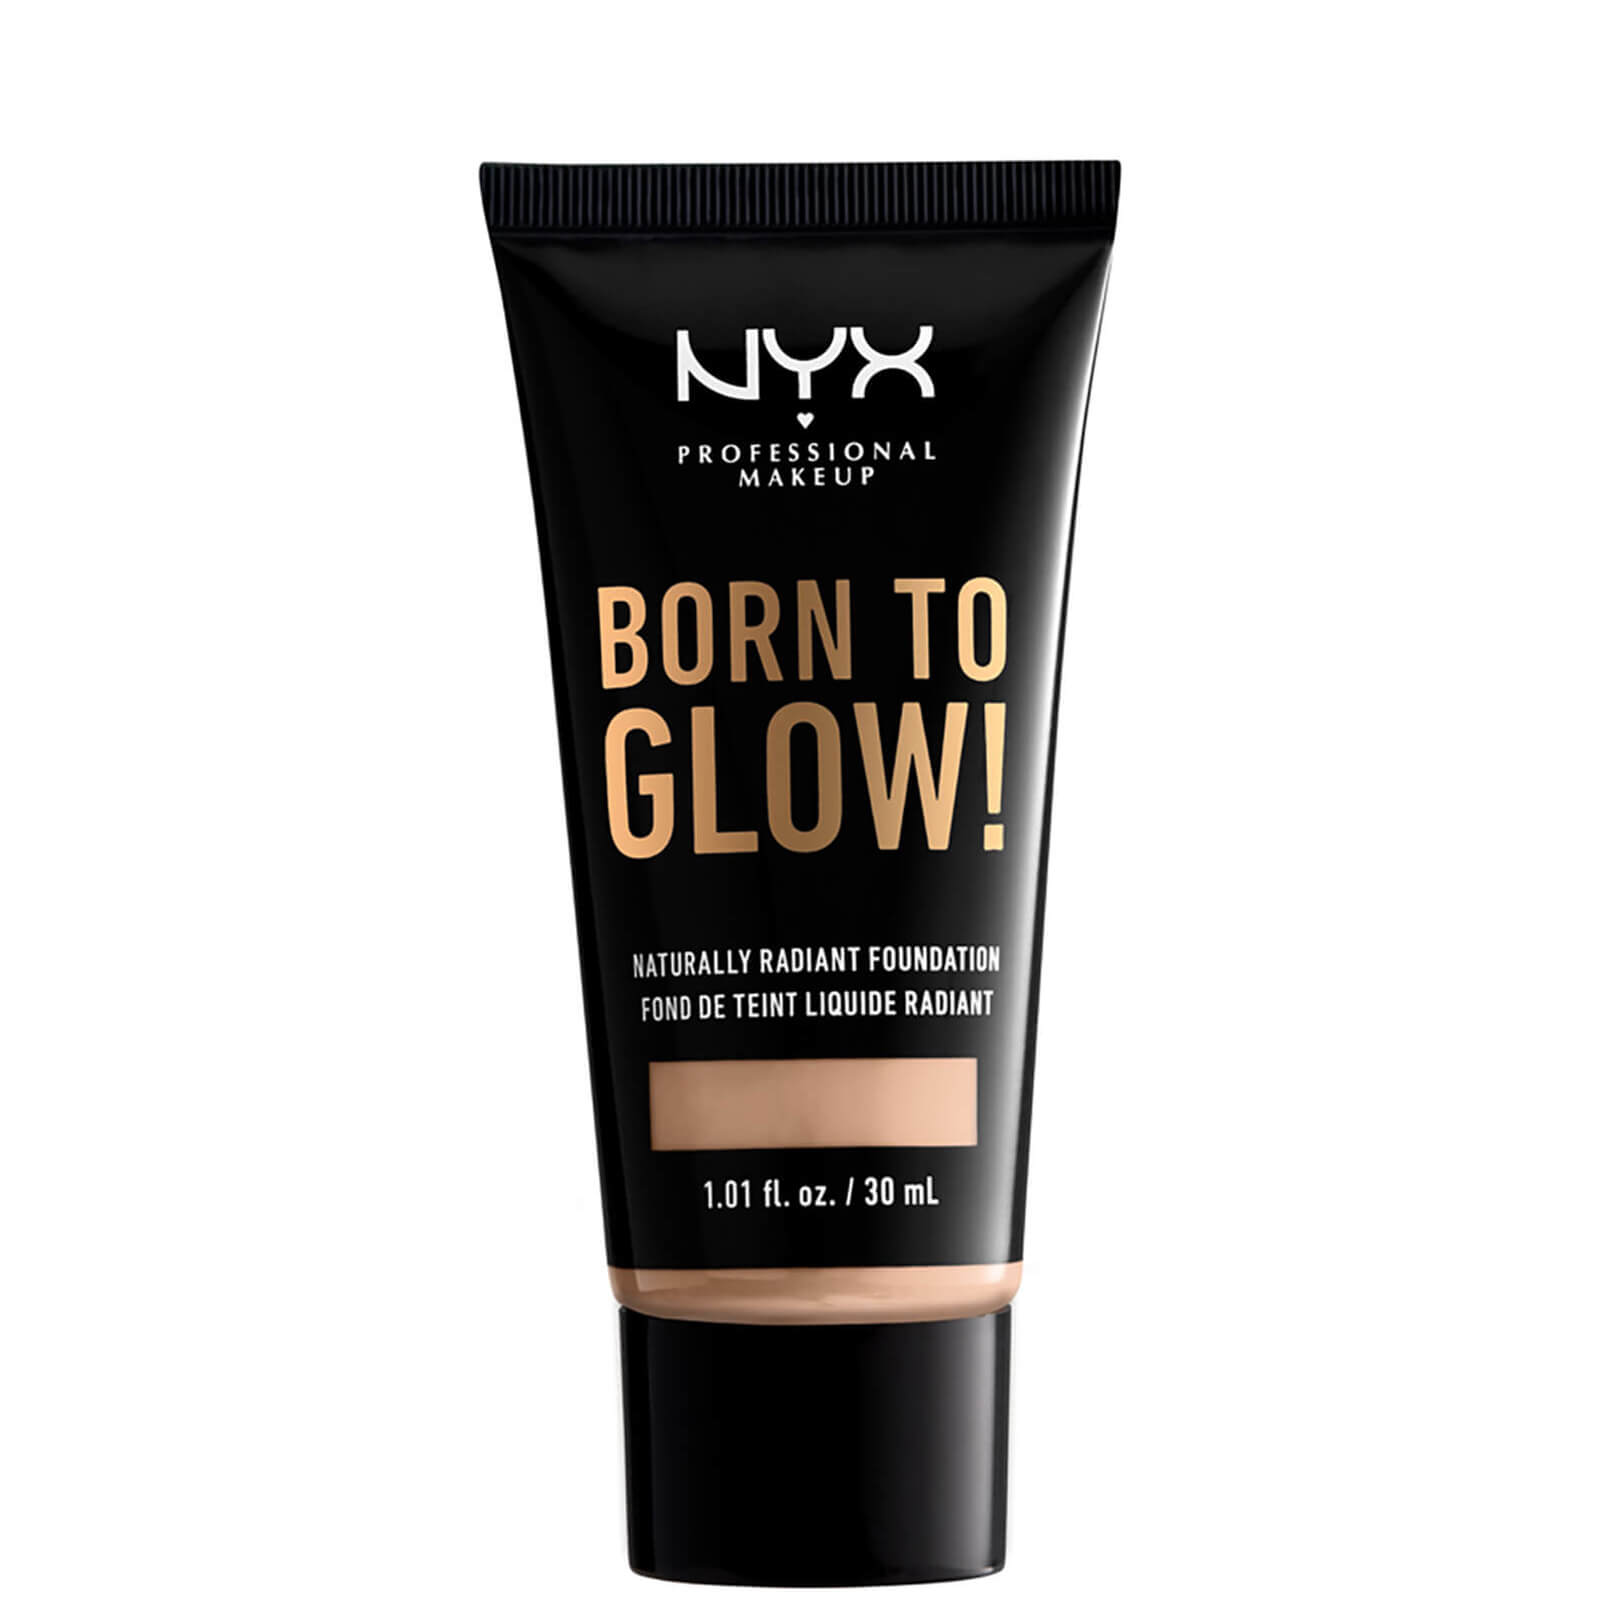 NYX Professional Makeup Born to Glow Naturally Radiant Foundation 30ml (Various Shades) - Light